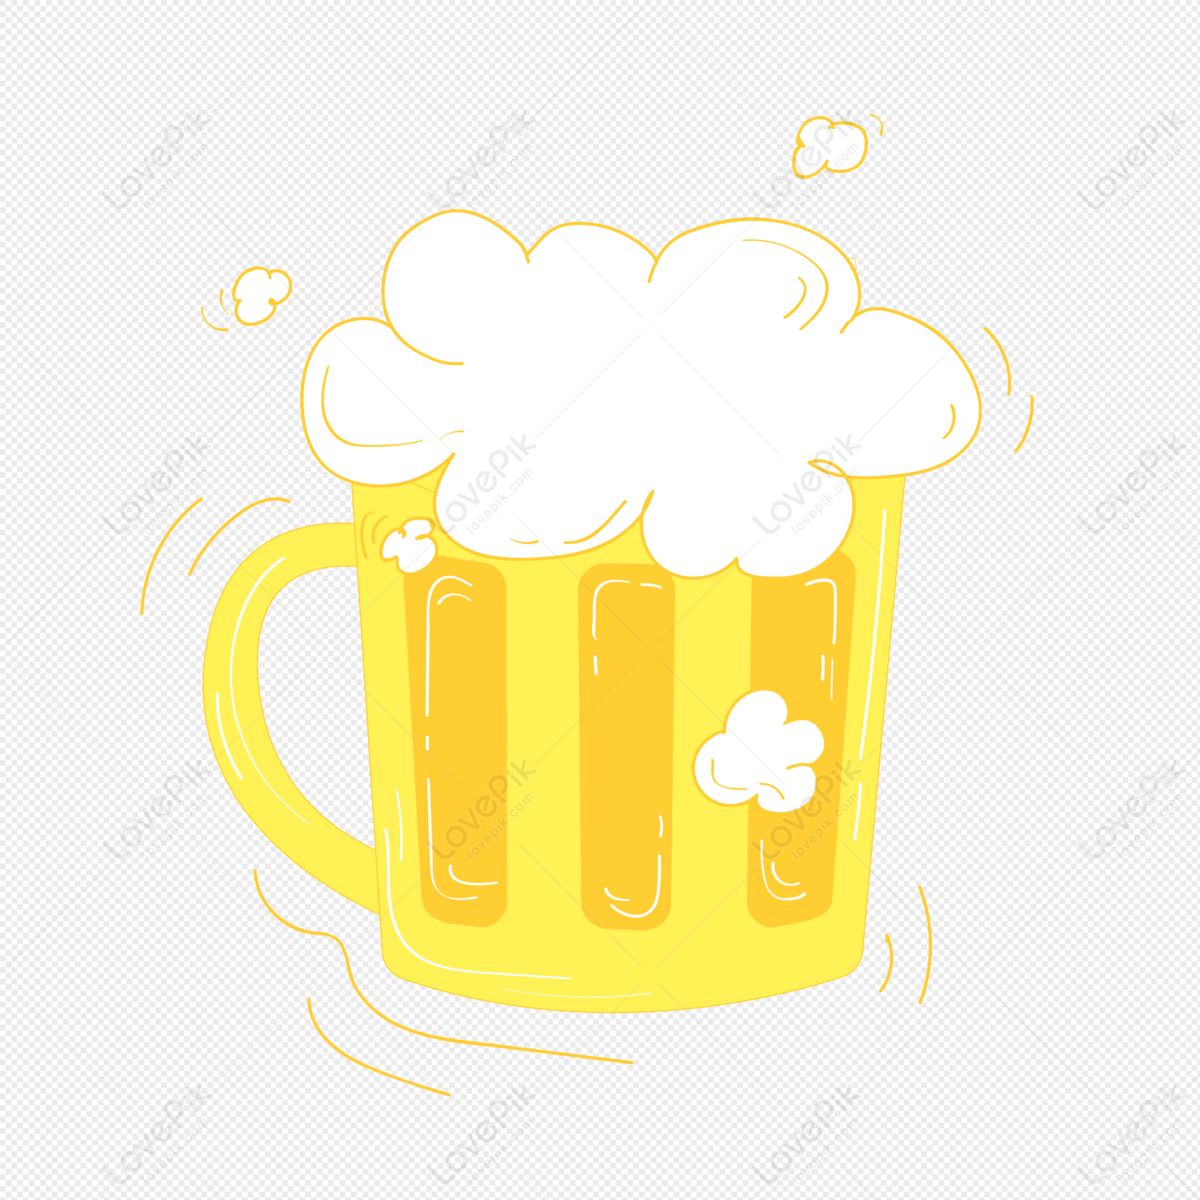 Cartoon Hand Drawn Beer PNG Hd Transparent Image And Clipart Image For Free  Download - Lovepik | 401271474